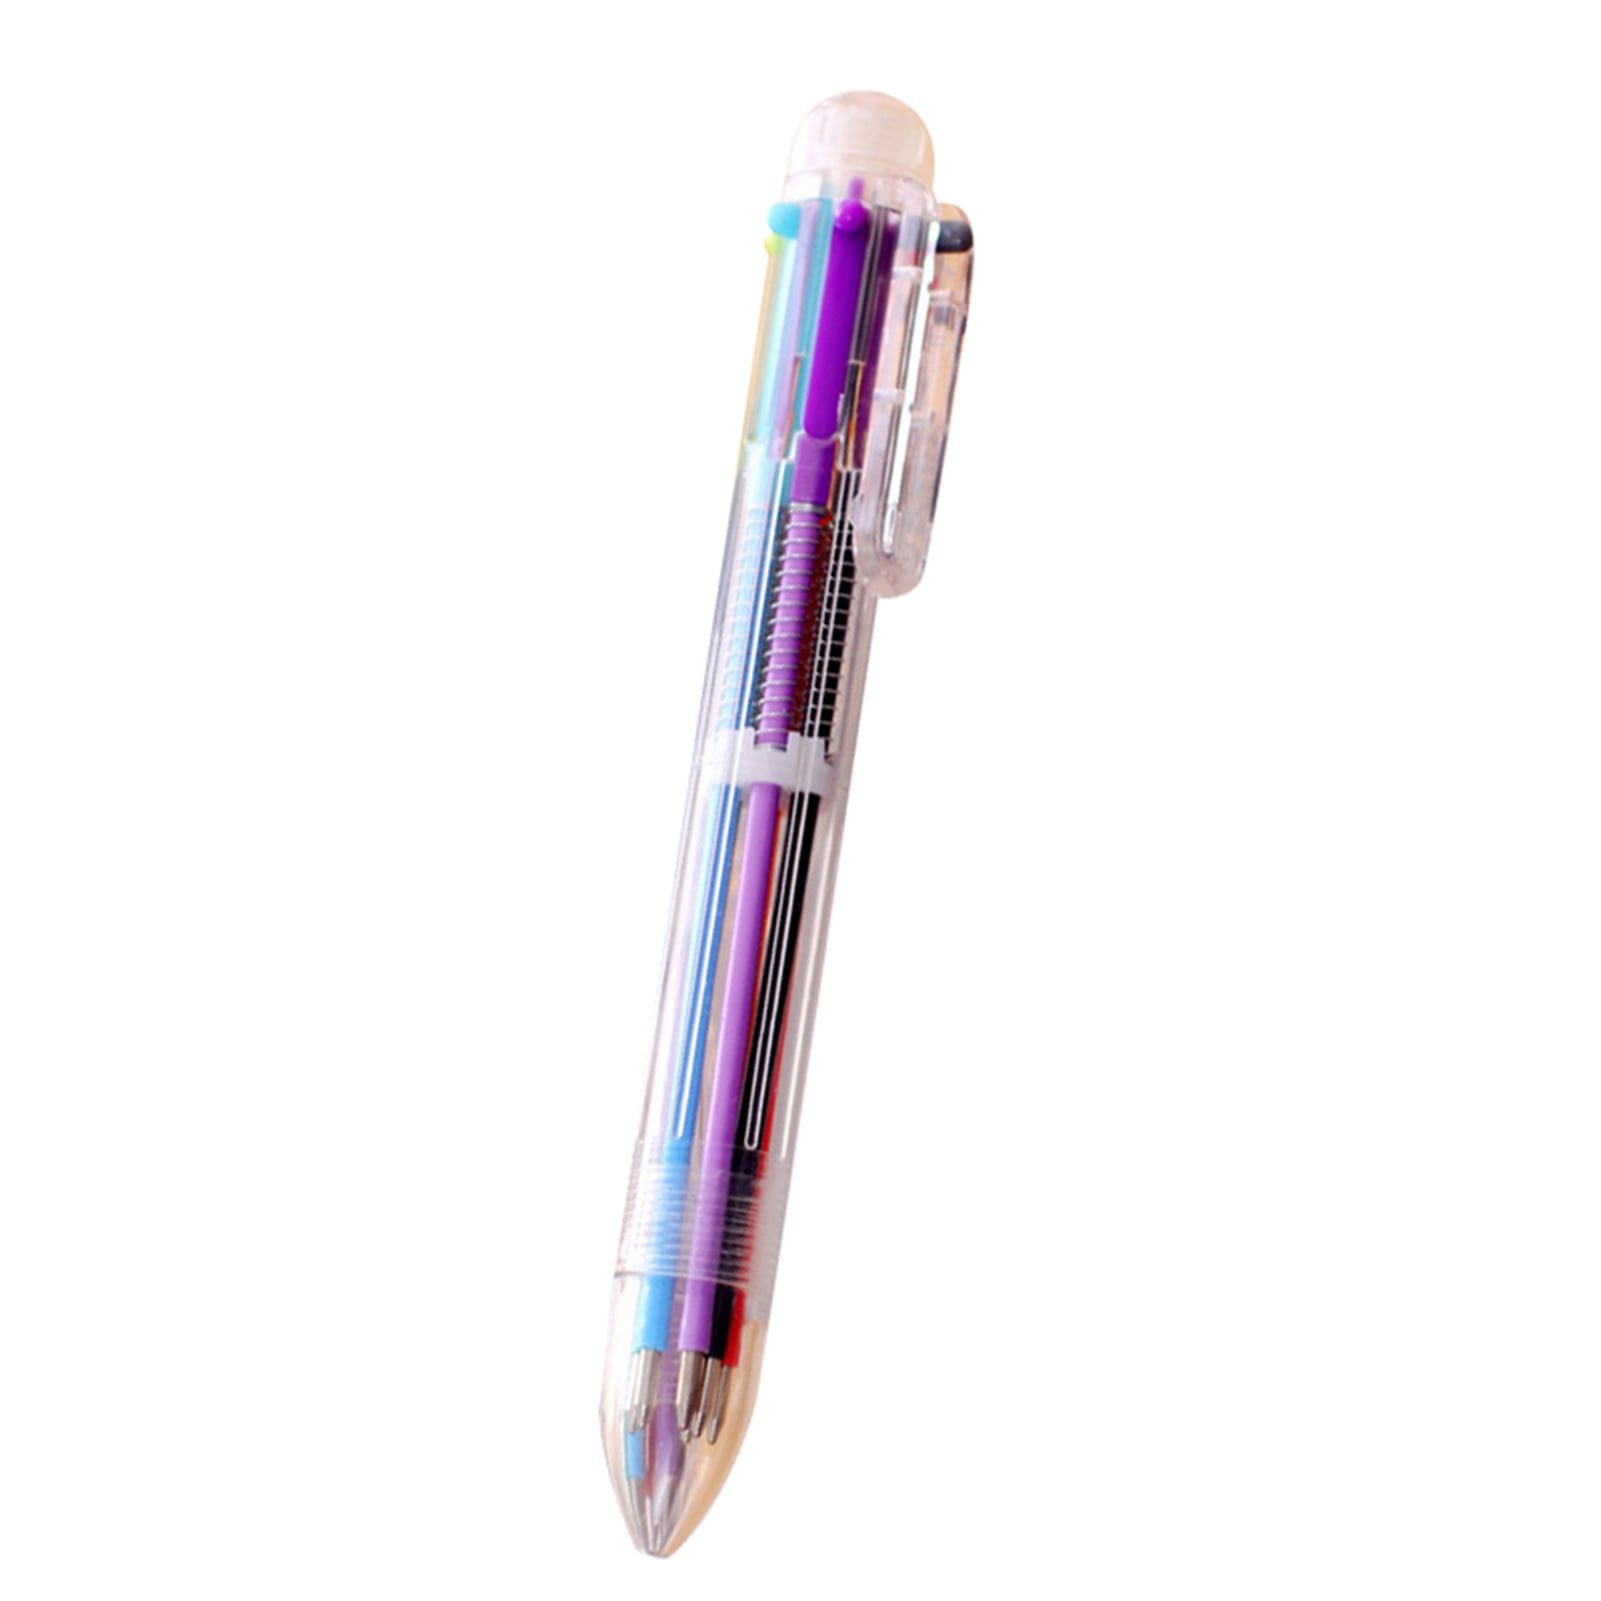  TAIKUU 久の物 9 PACK Fancy Cute Ballpoint Pen, Comfortable  Sparkle Pens with Replacement Refills, Medium Point 1.0 mm, Perfect for  Women Girls Waitresses and Adults for Gifts (Love Style) 